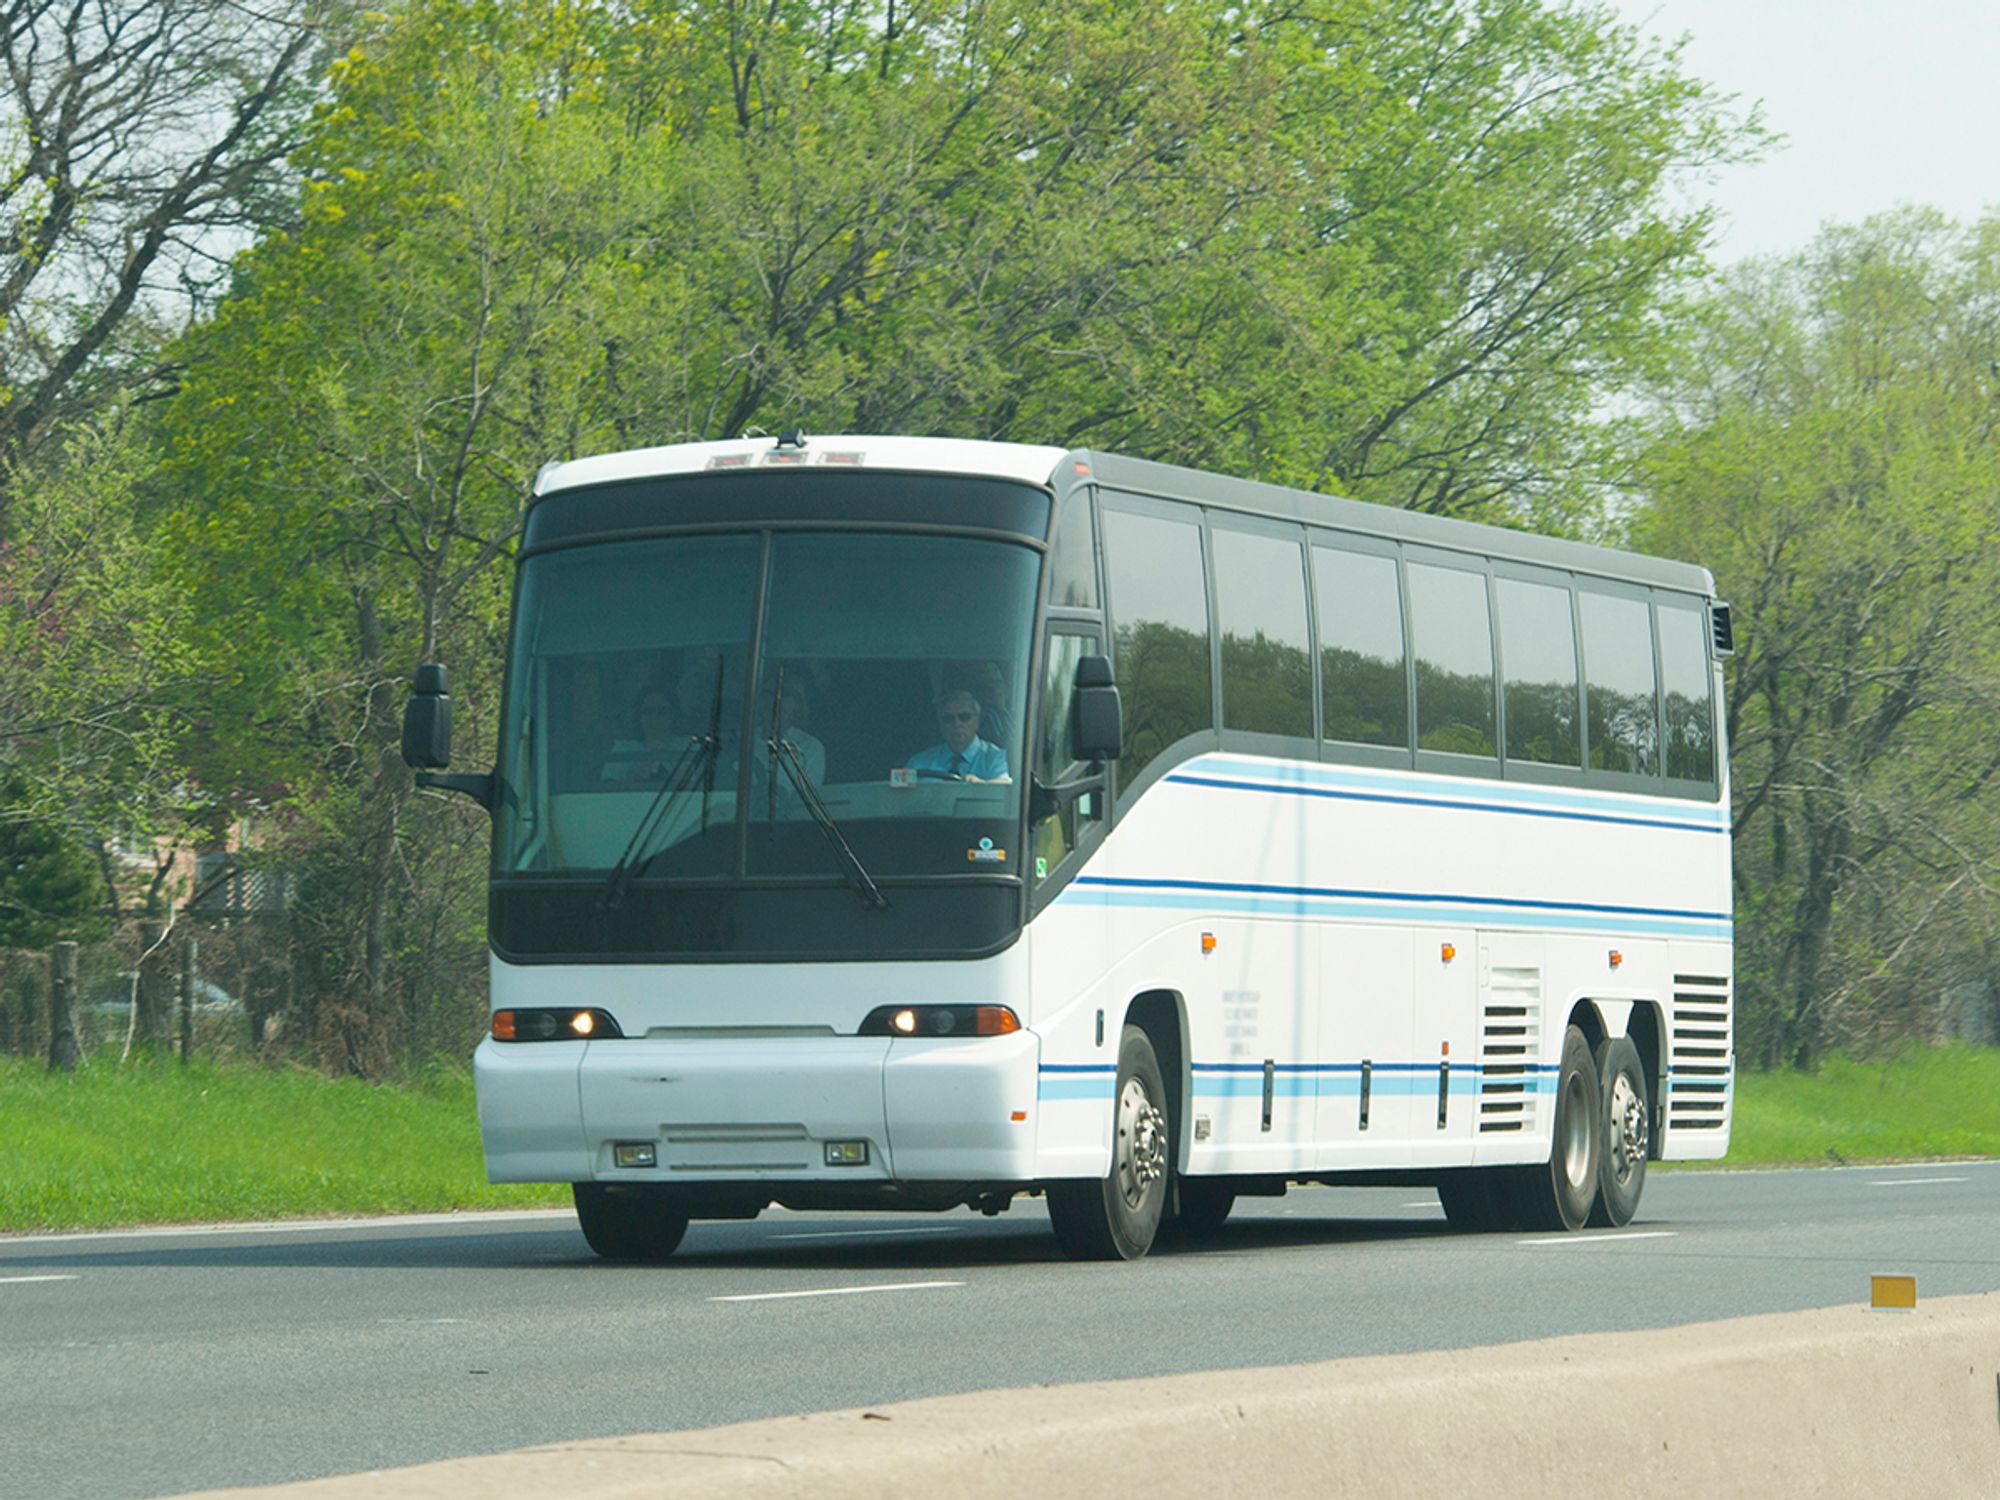 Motorcoach vehicle license or registration